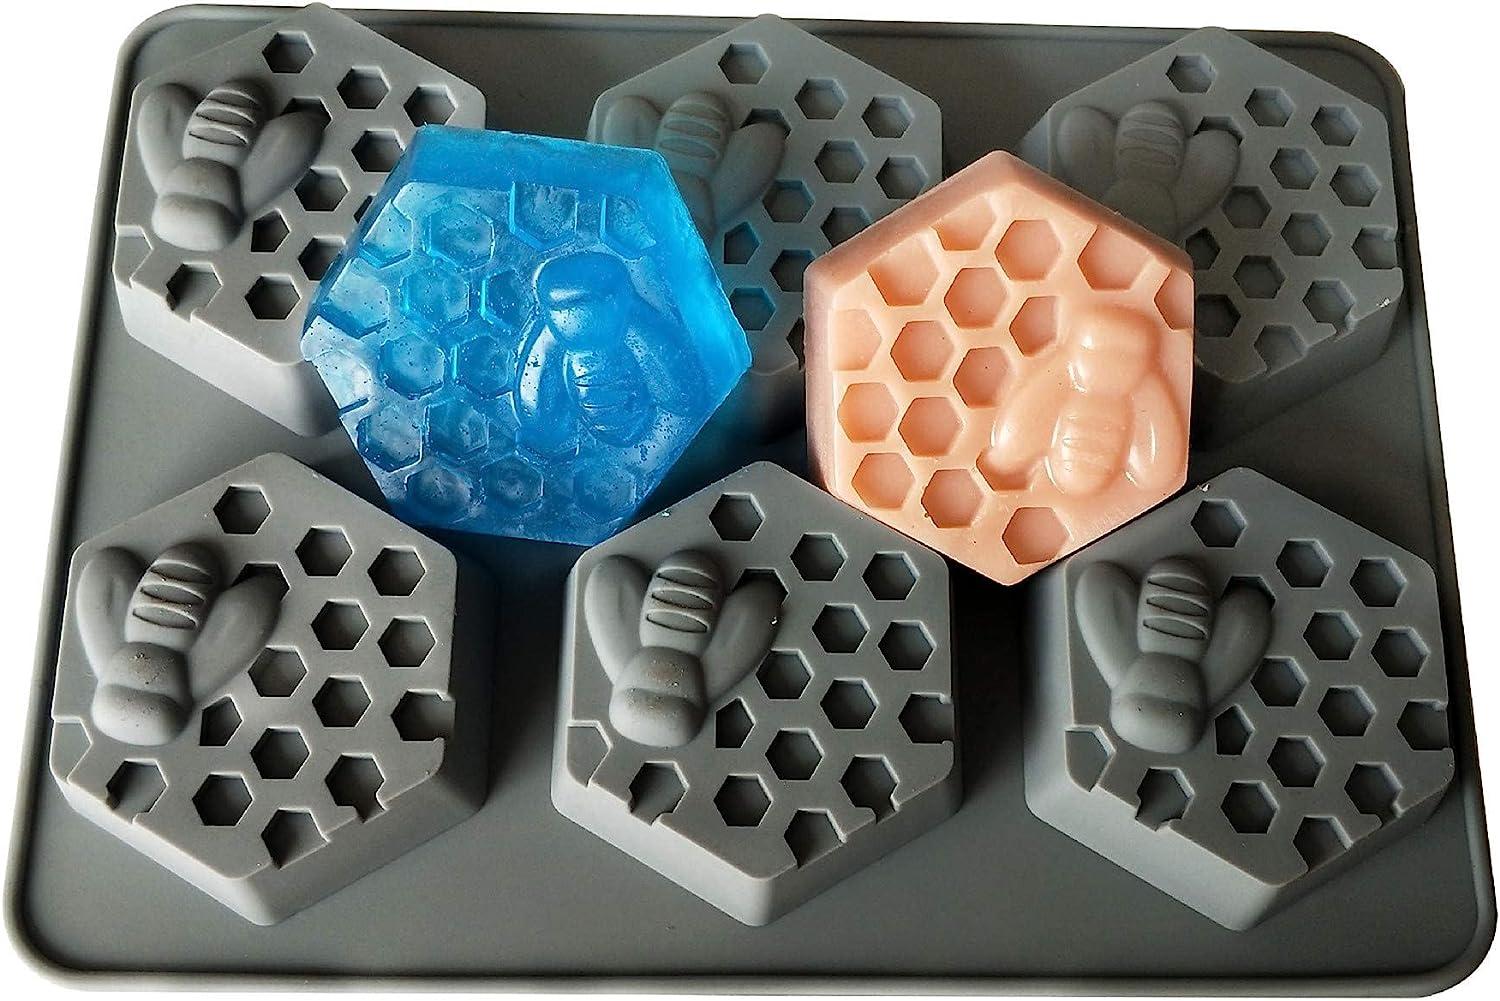  SJ 3D Bee Silicone Molds, Honeycomb Molds for Soaps